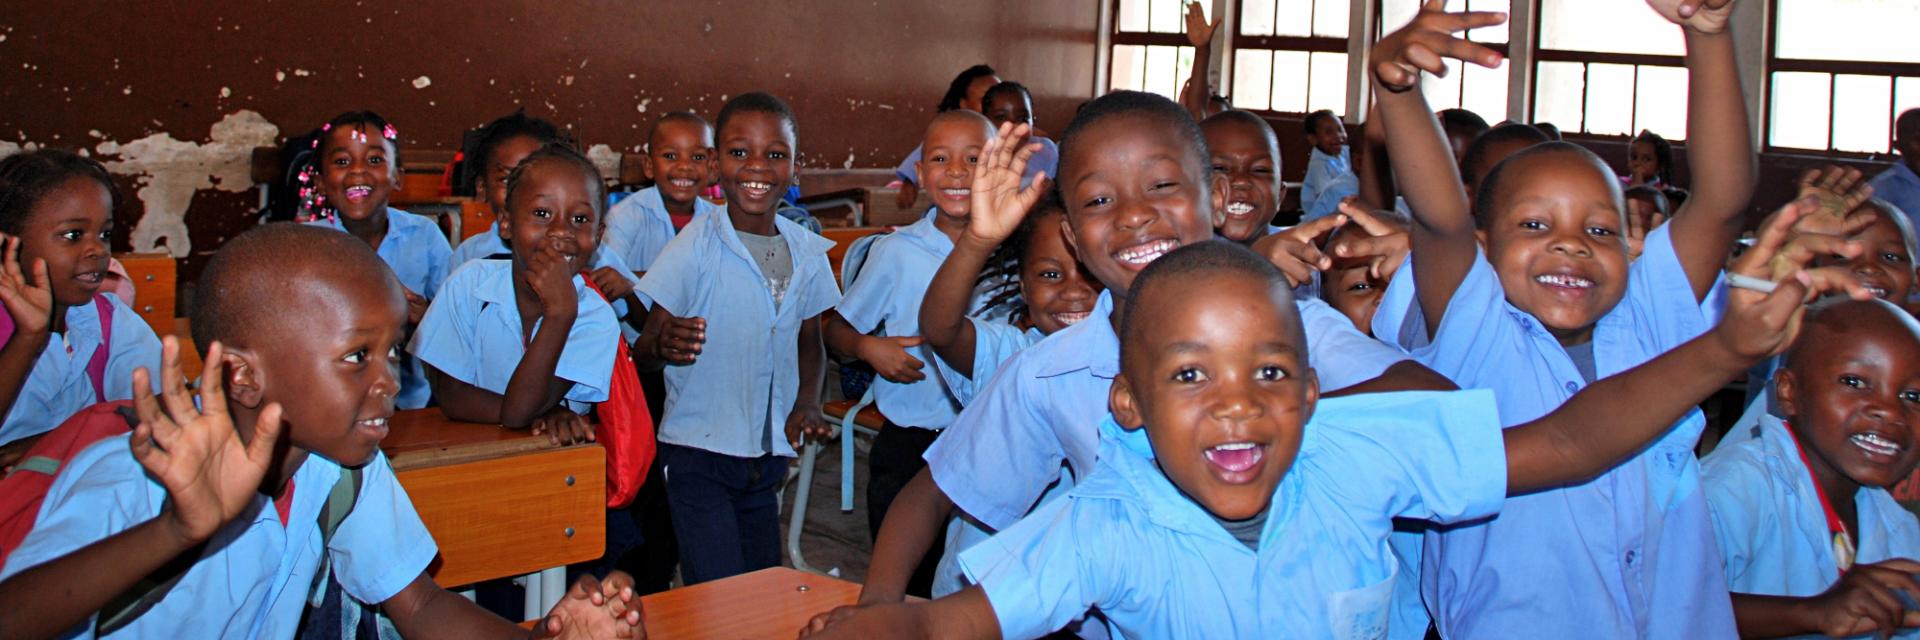 Experts say more quality education needed in Africa